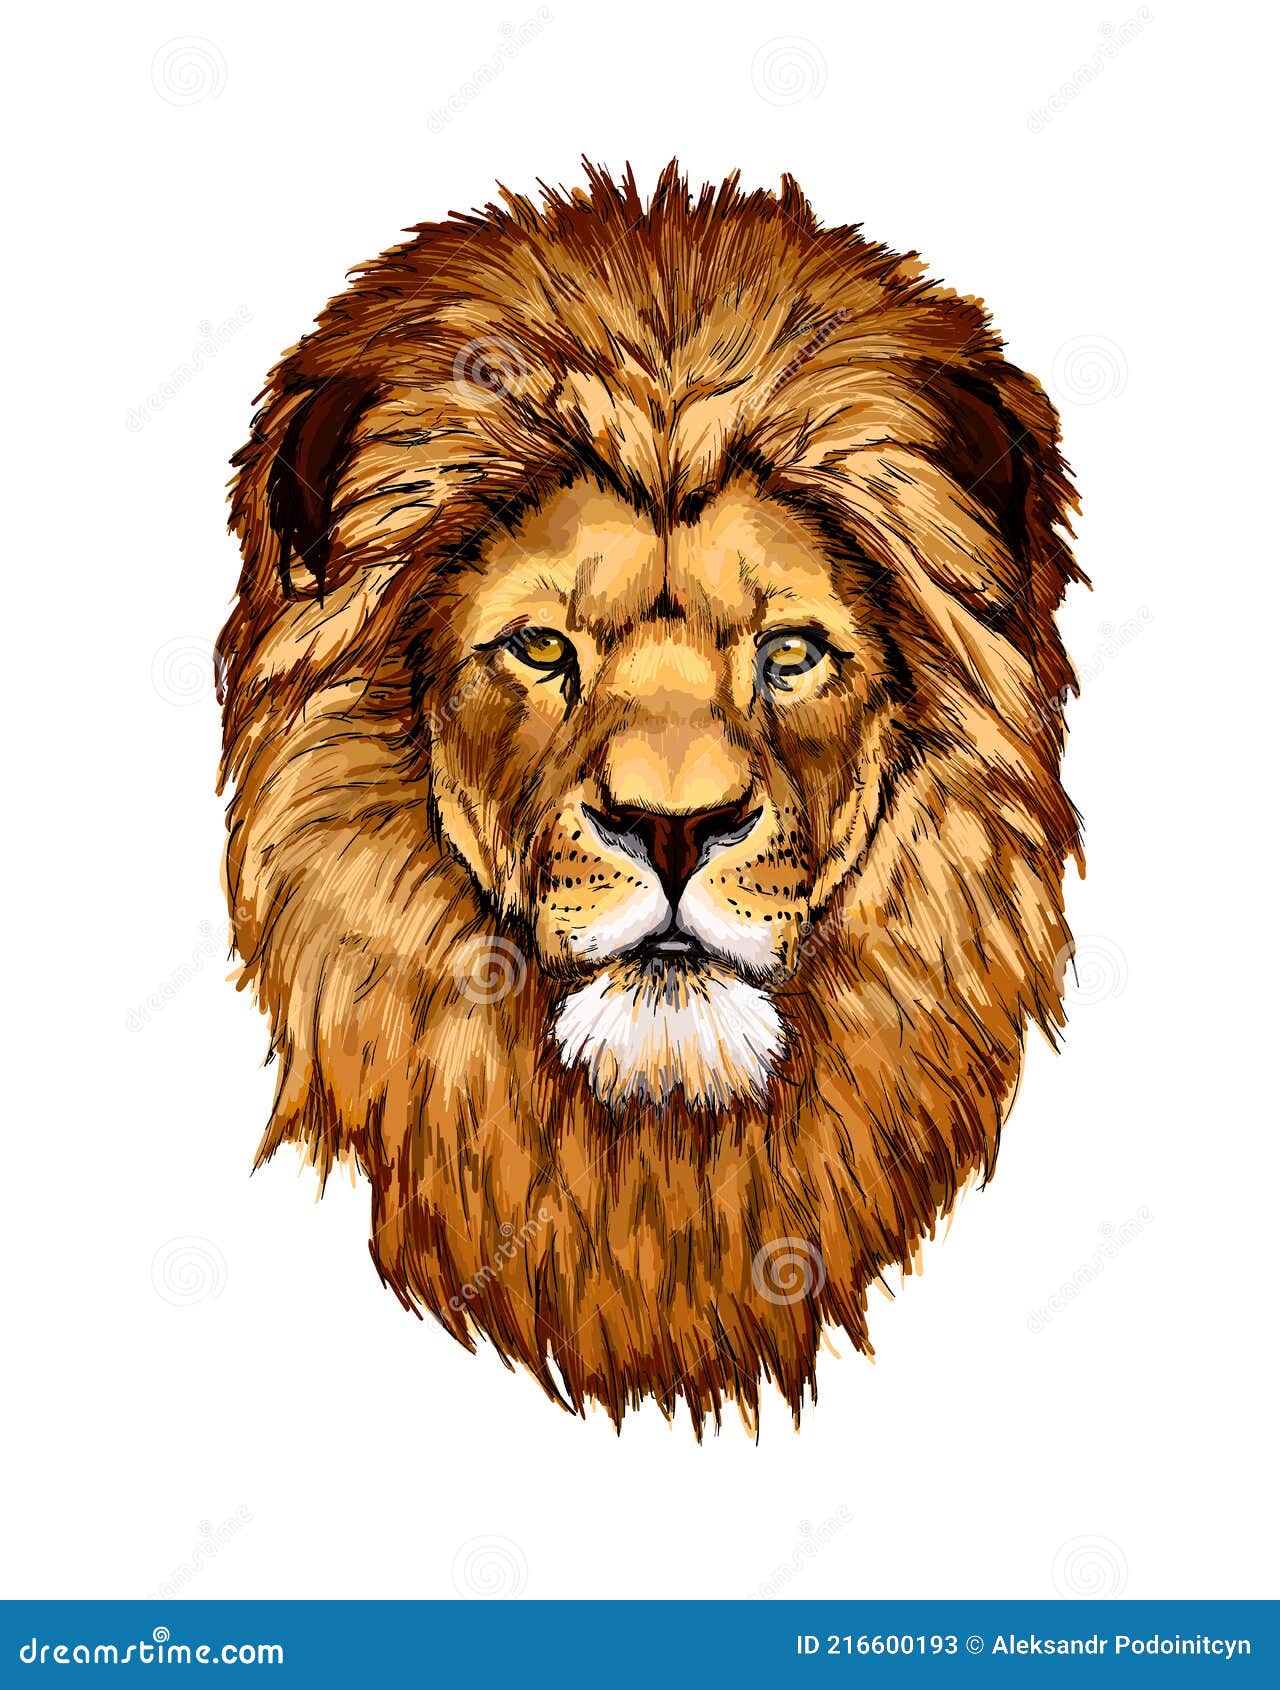 How To Draw Lion Face Pictures | Lion Face Step by Step Drawing Lessons-saigonsouth.com.vn